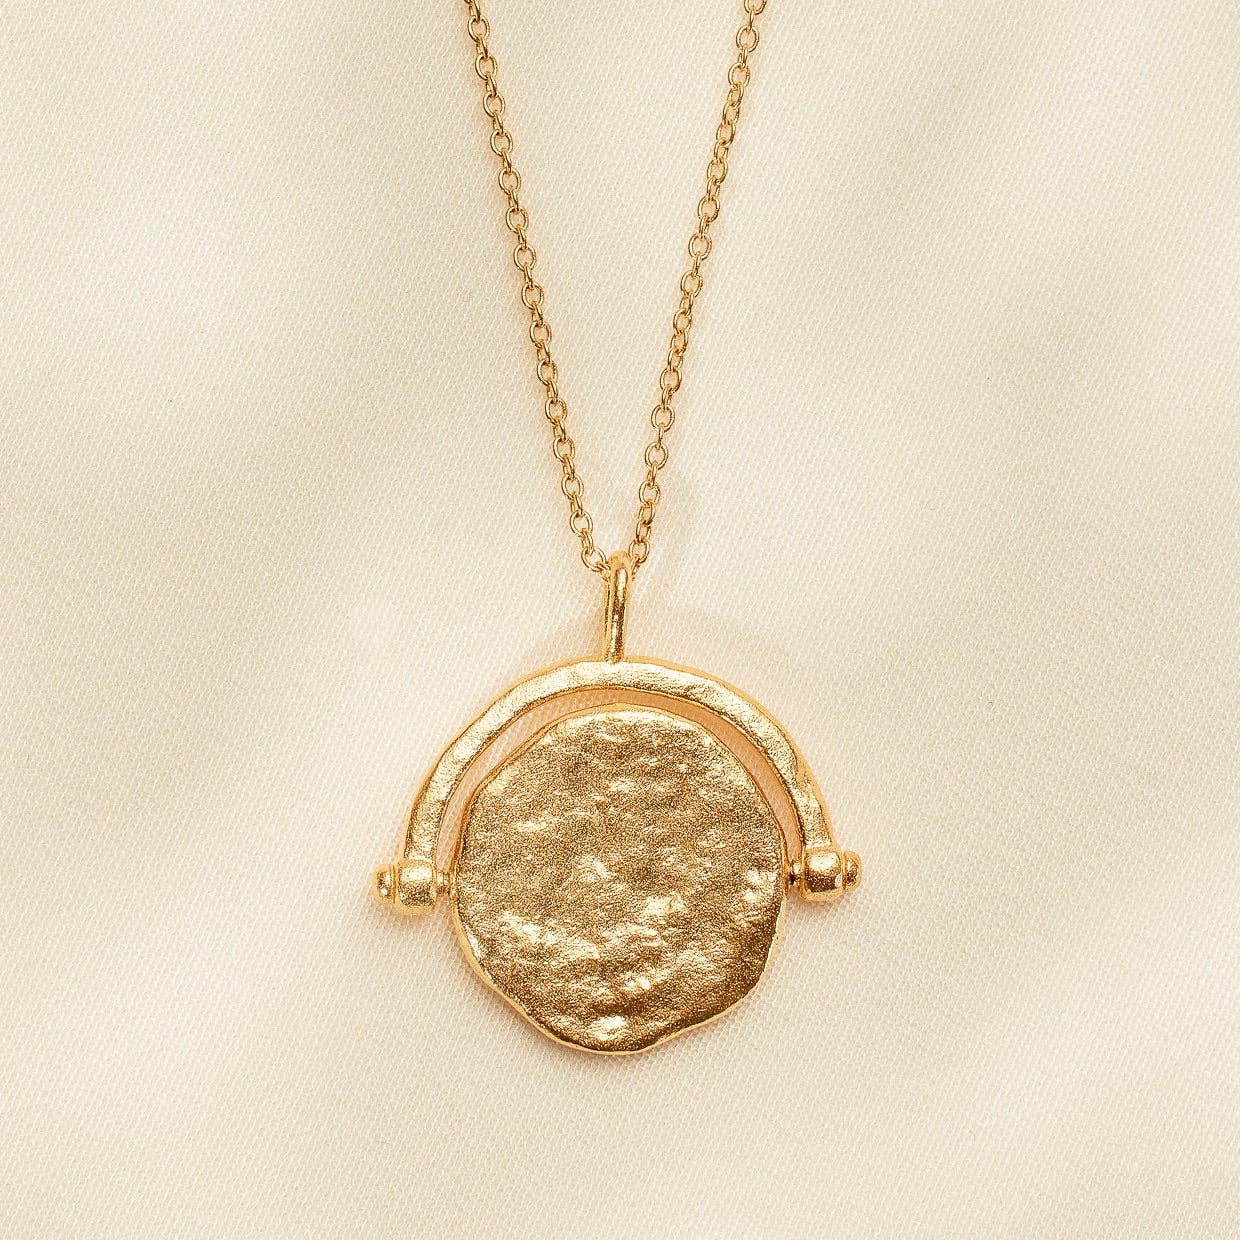 Solune Necklace | Jewelry Gold Gift Waterproof - Out of the Blue